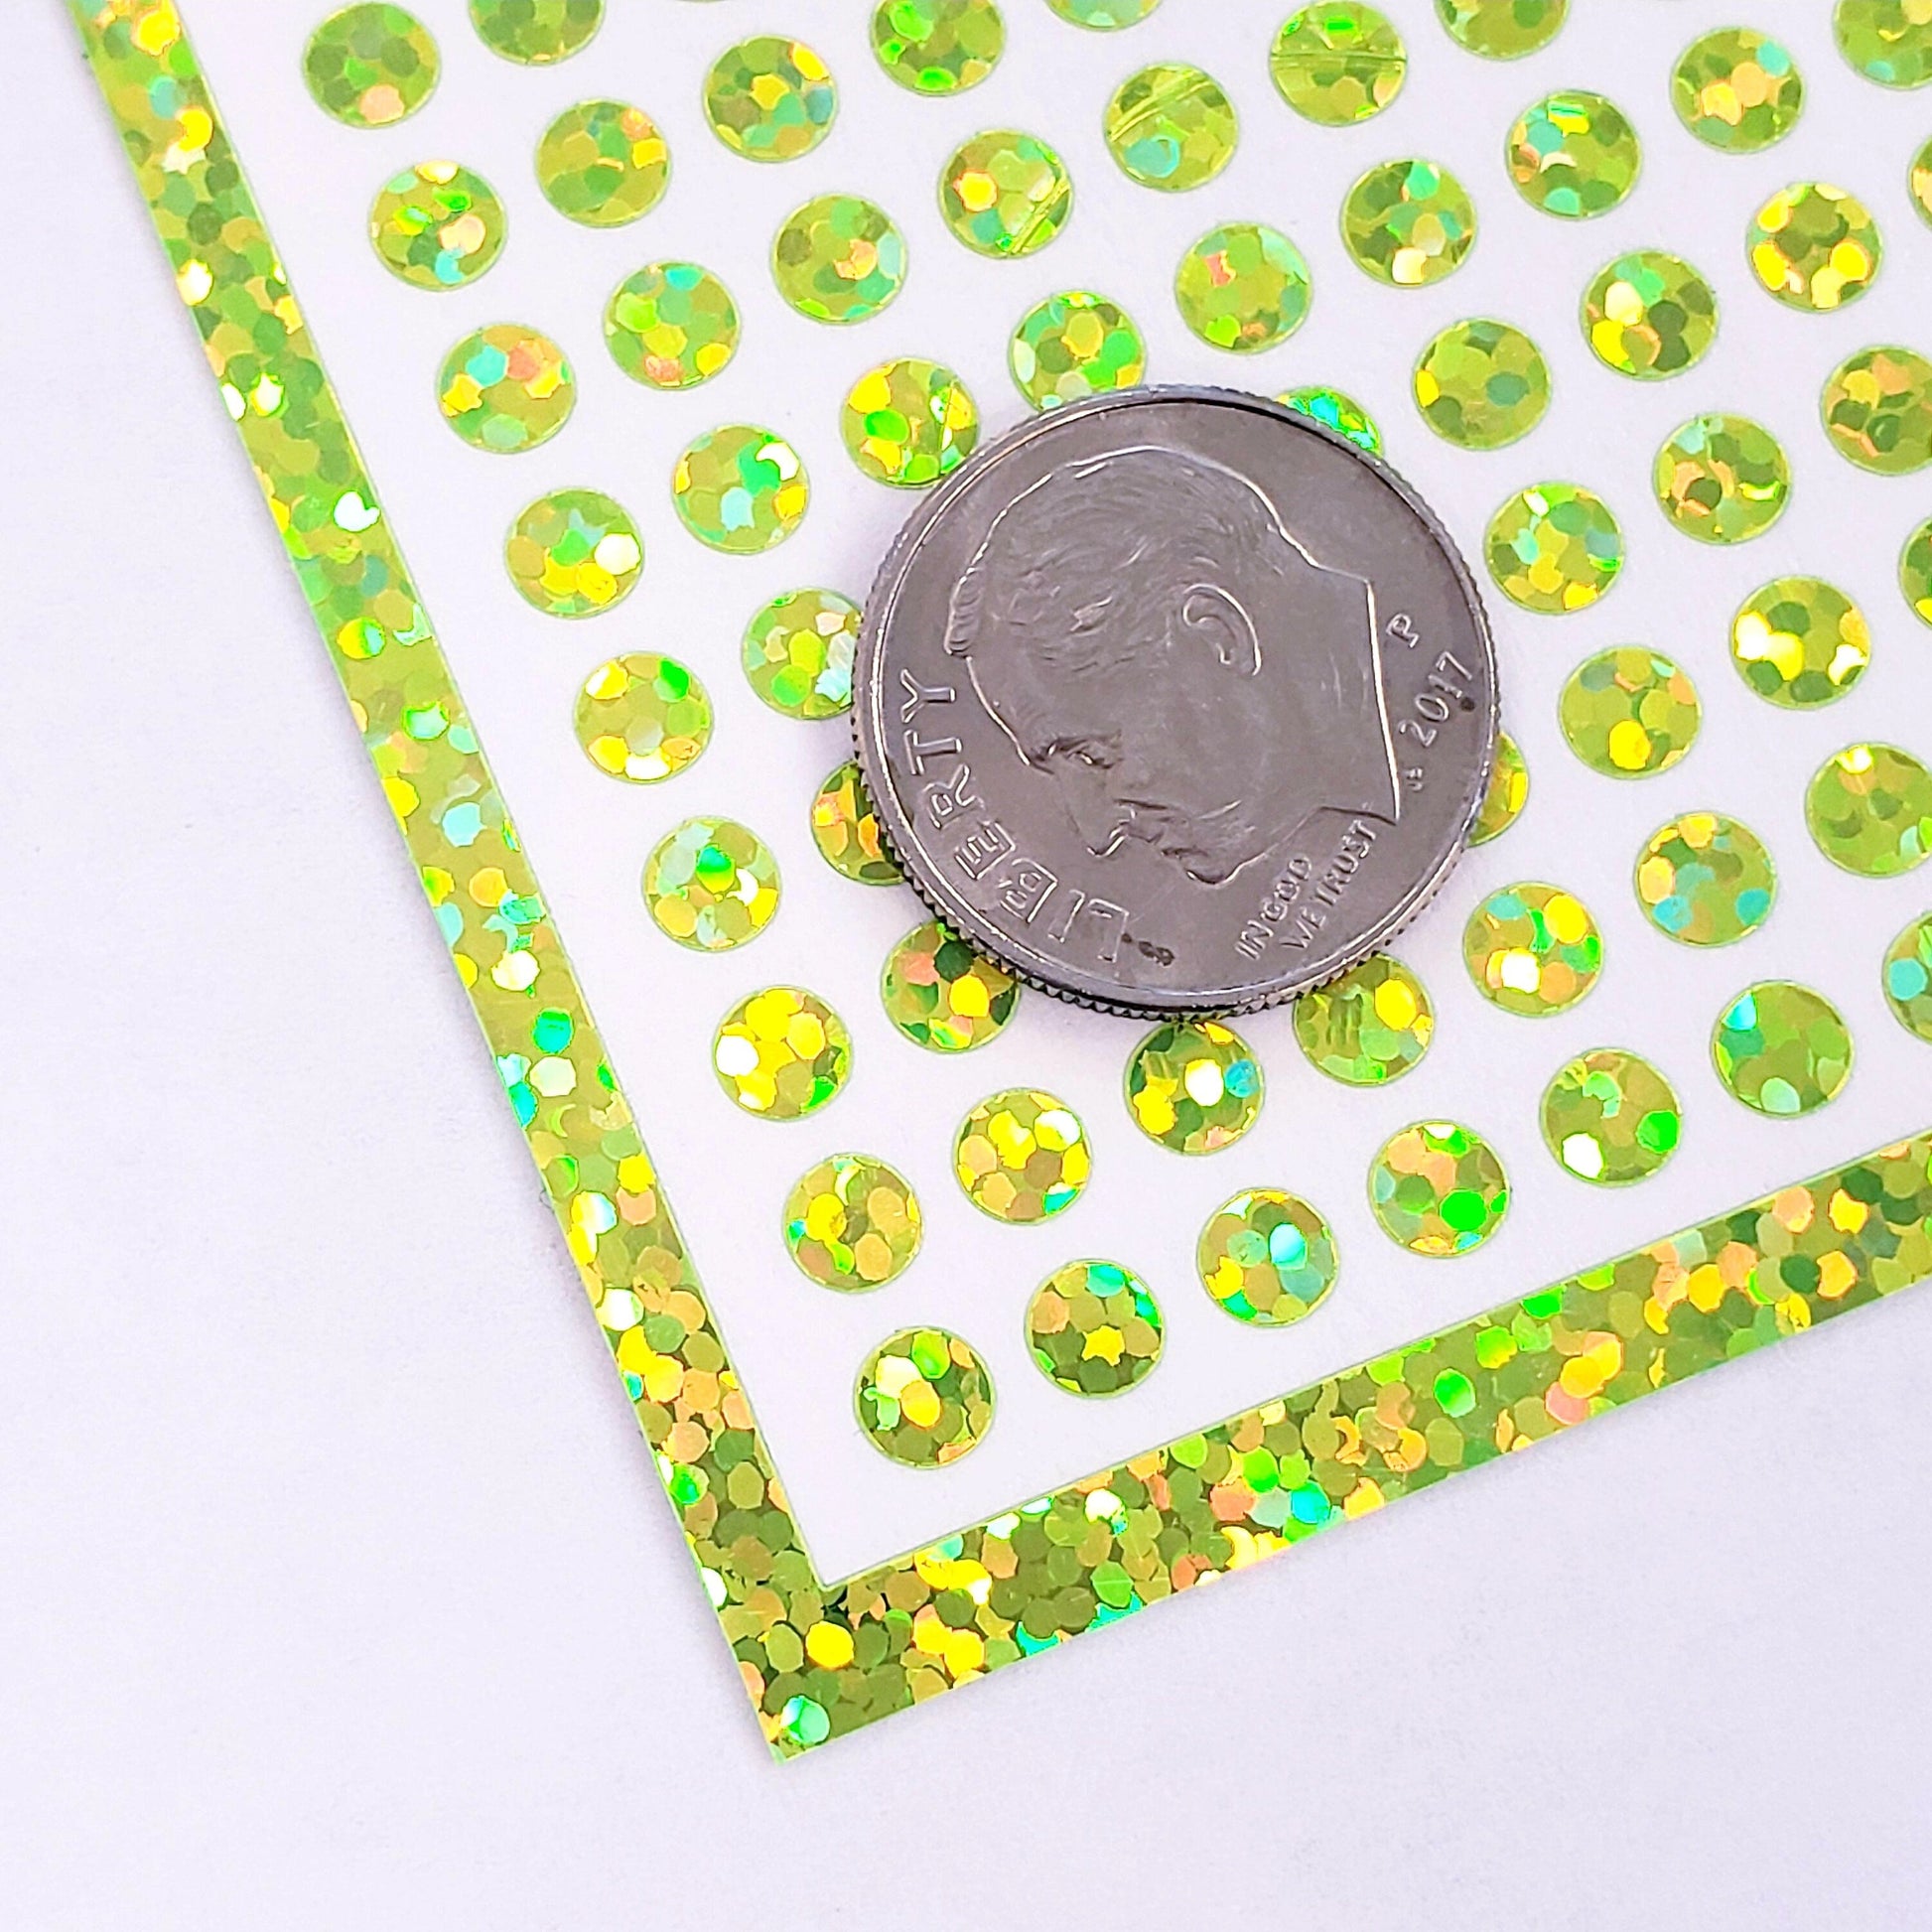 Extra Small Yellow Green Glitter Dot Stickers. Set of 750 micro sized neon dots for journals, planners, goal trackers, calendars and crafts.